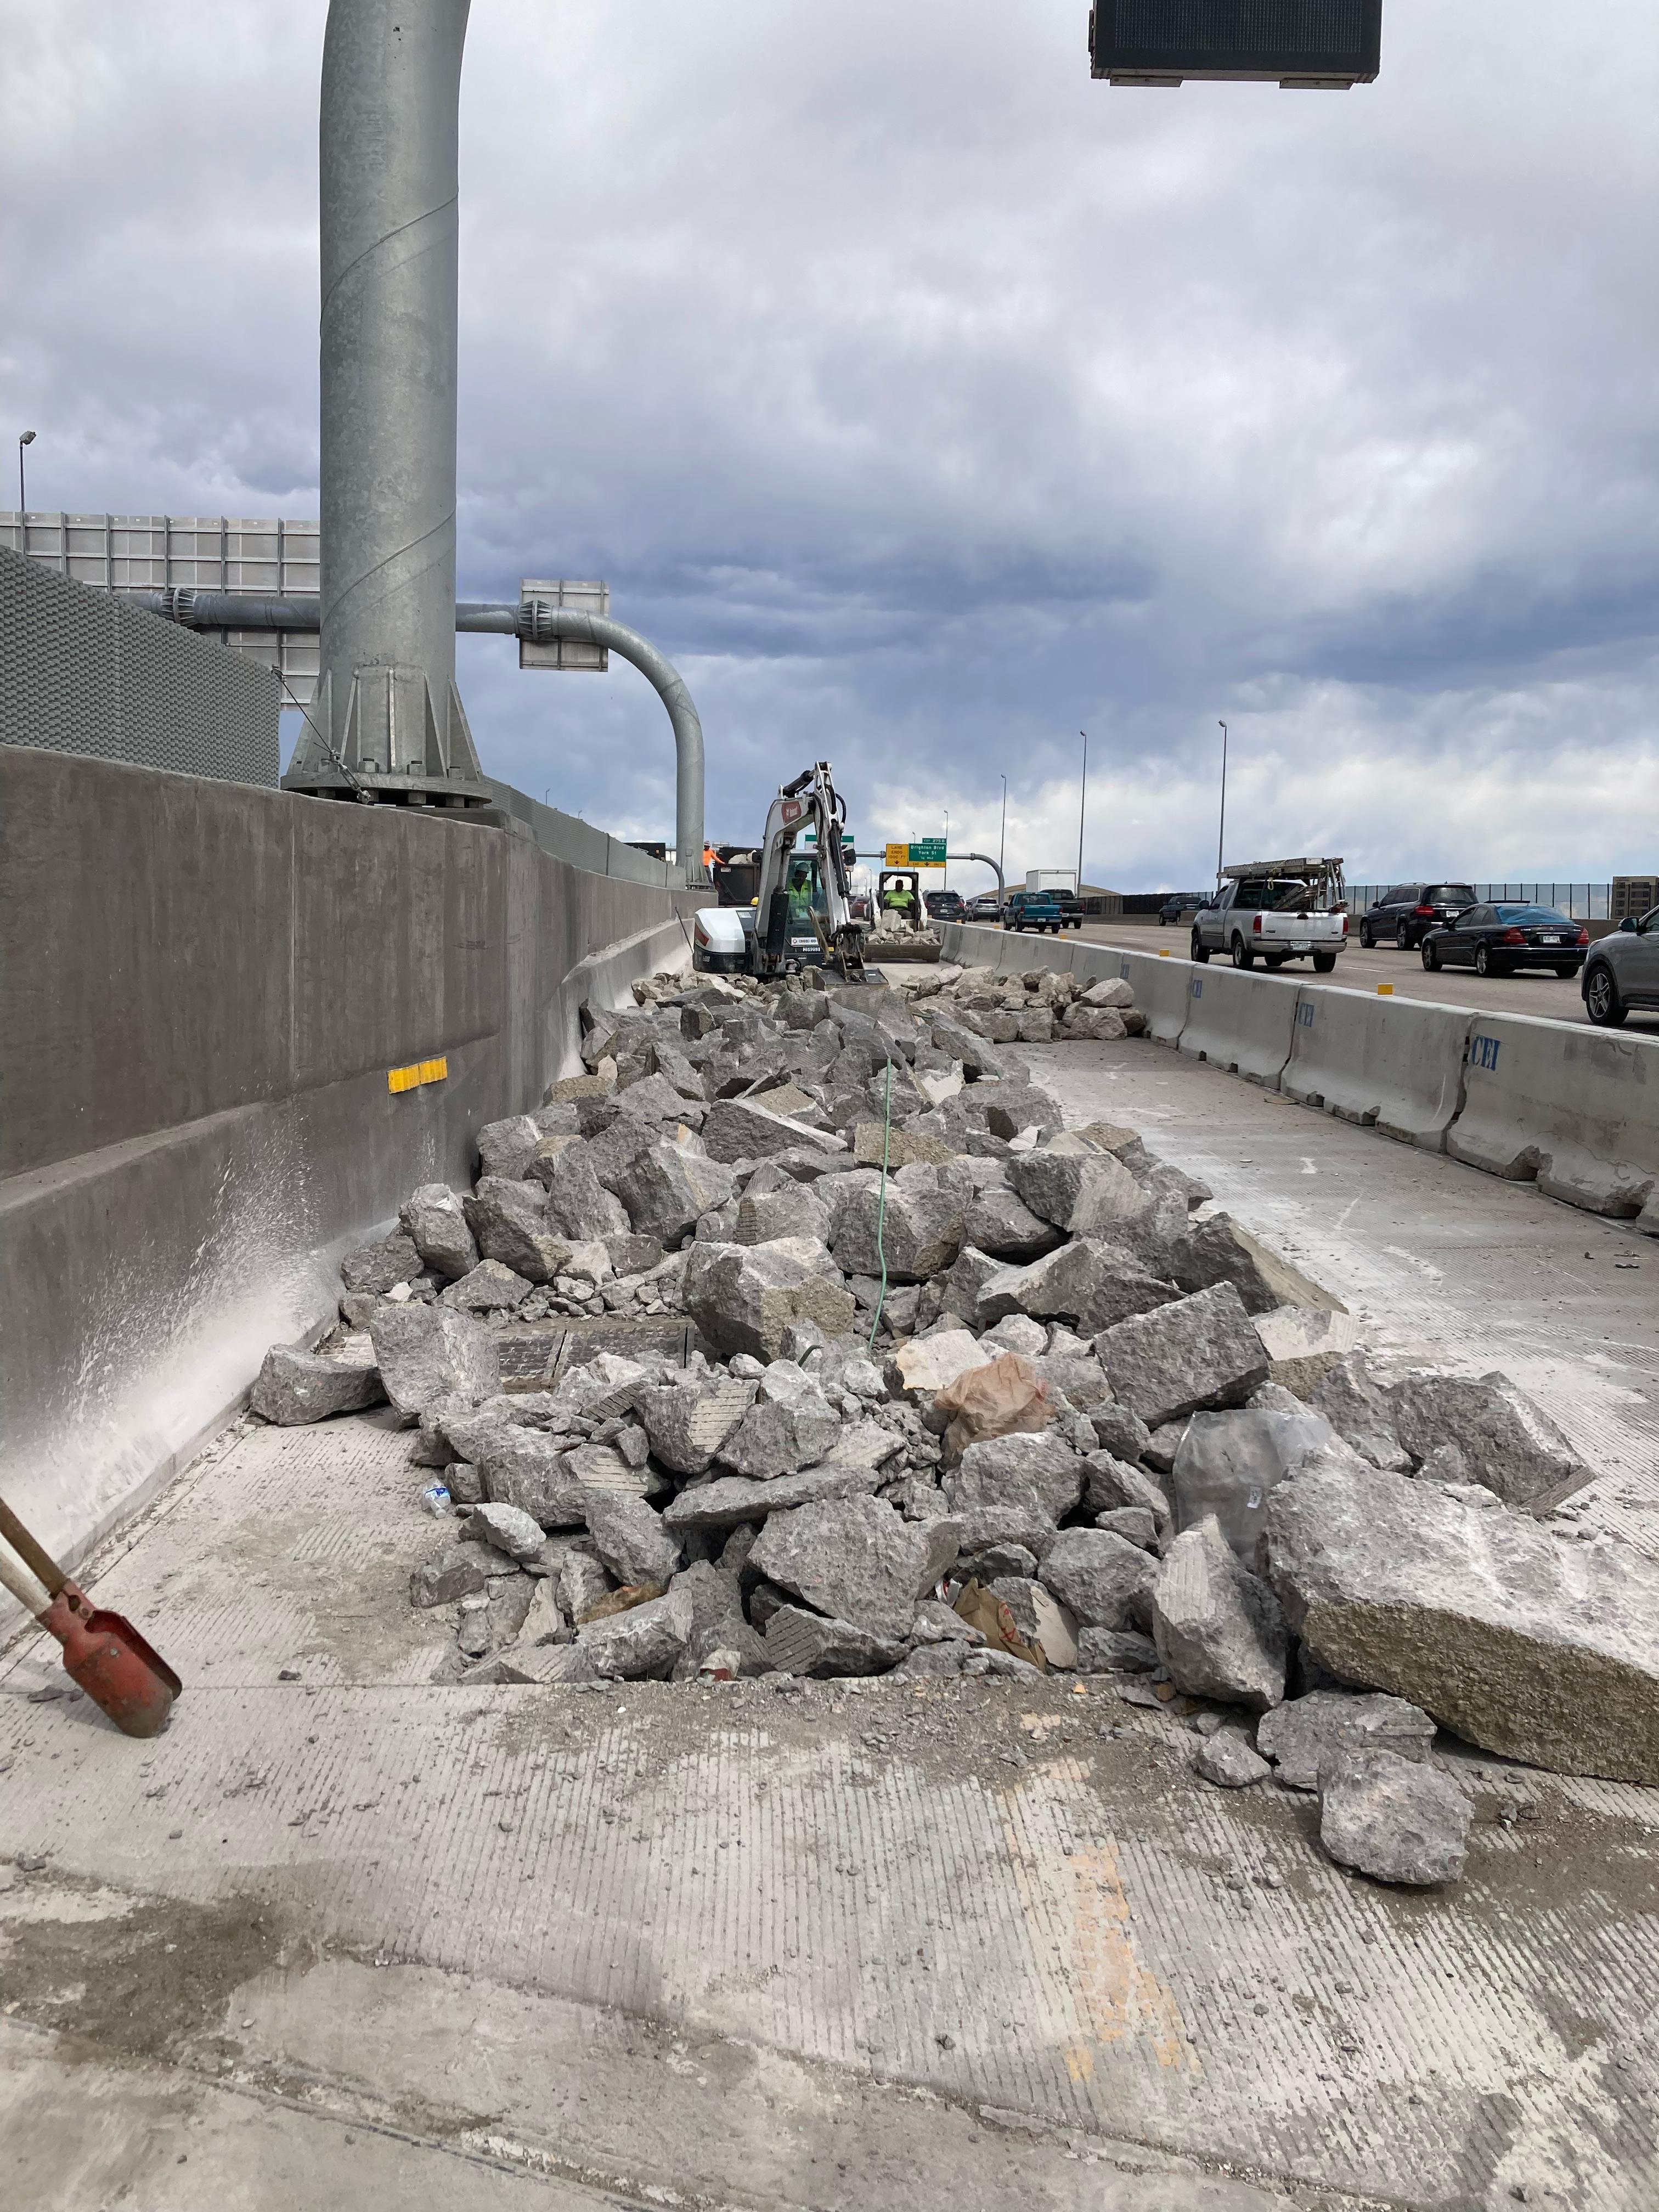 Removal operations on the I-70 Express Lane to repair drainages in May. detail image